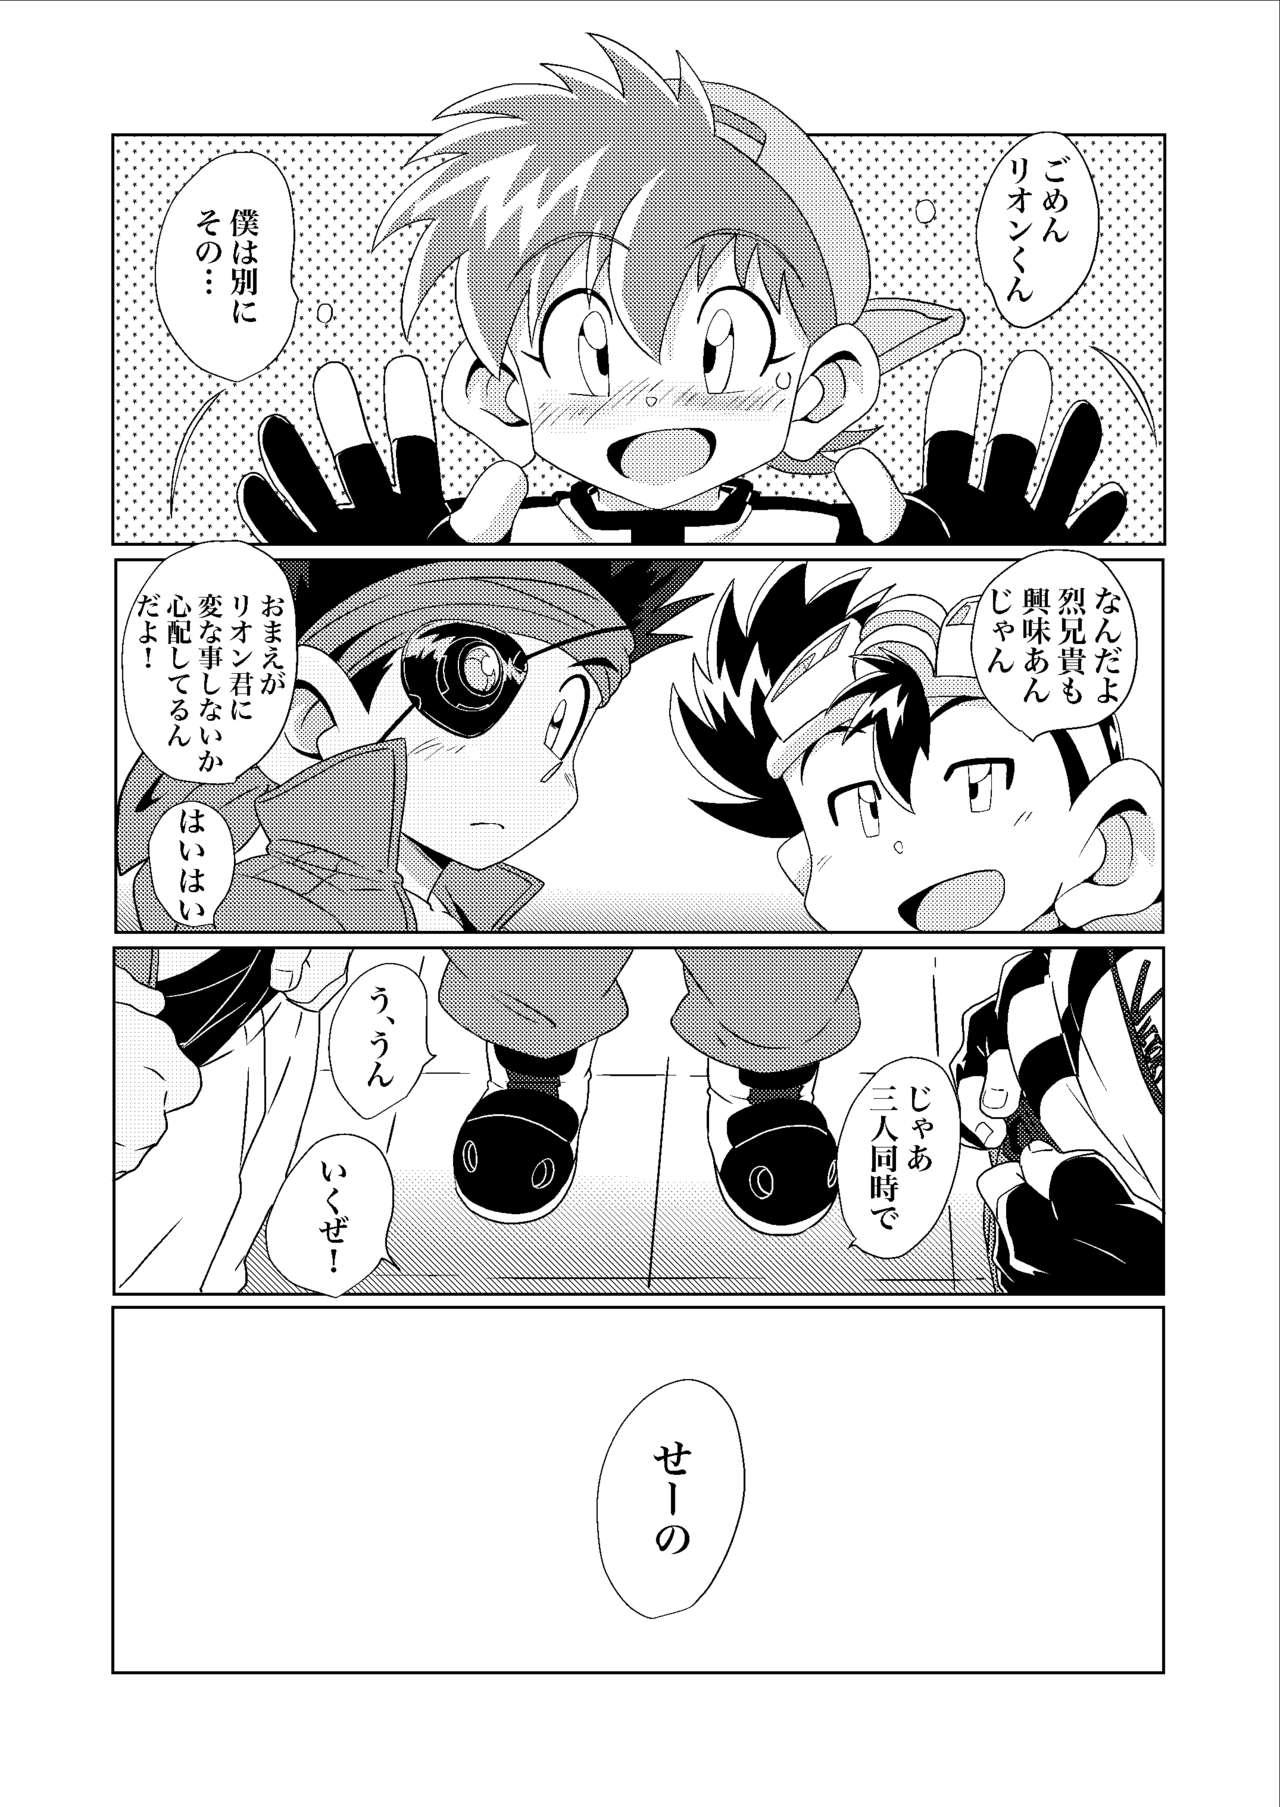 Gay Oralsex Chase the Wind - Bakusou kyoudai lets and go Lolicon - Page 6